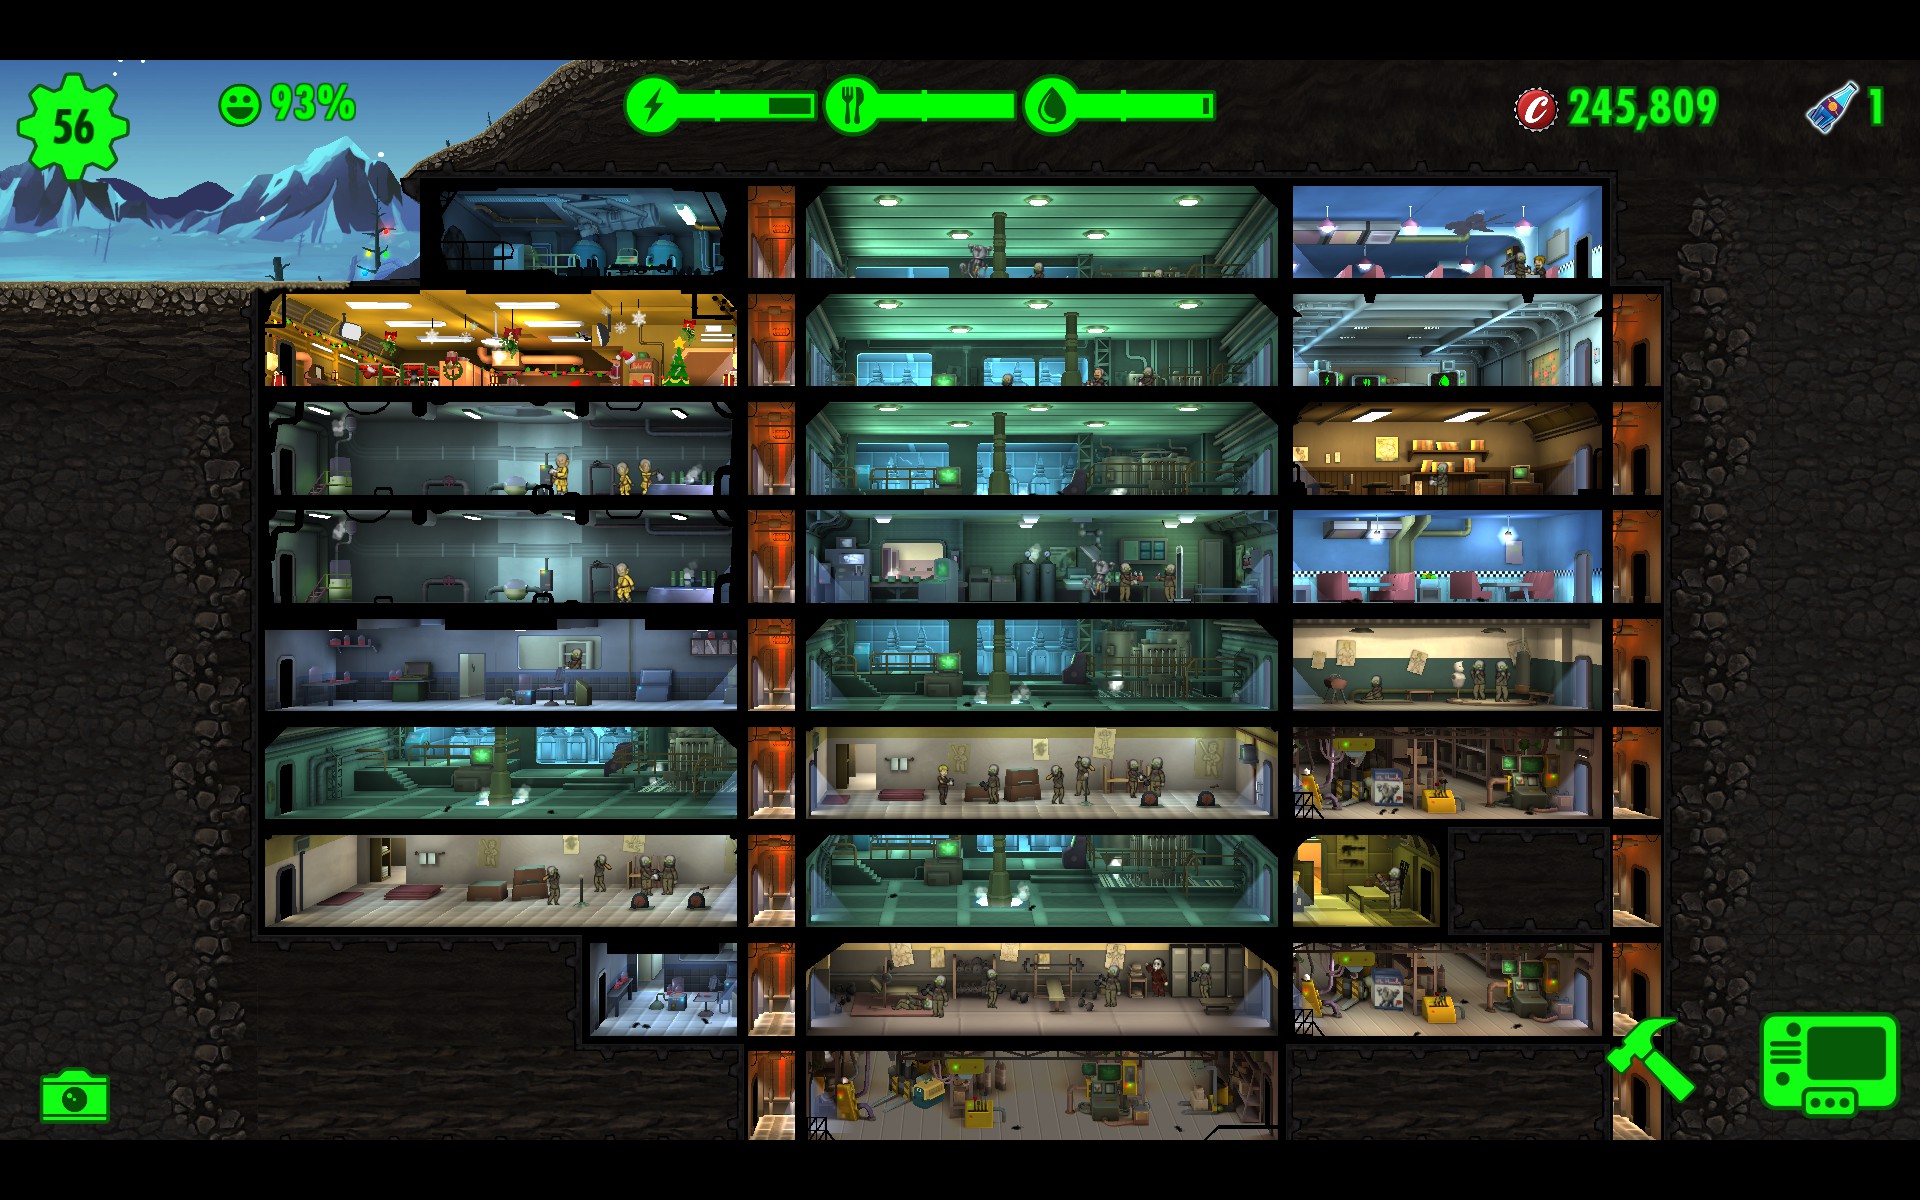 Survival Mode to 100 Population for Fallout Shelter.